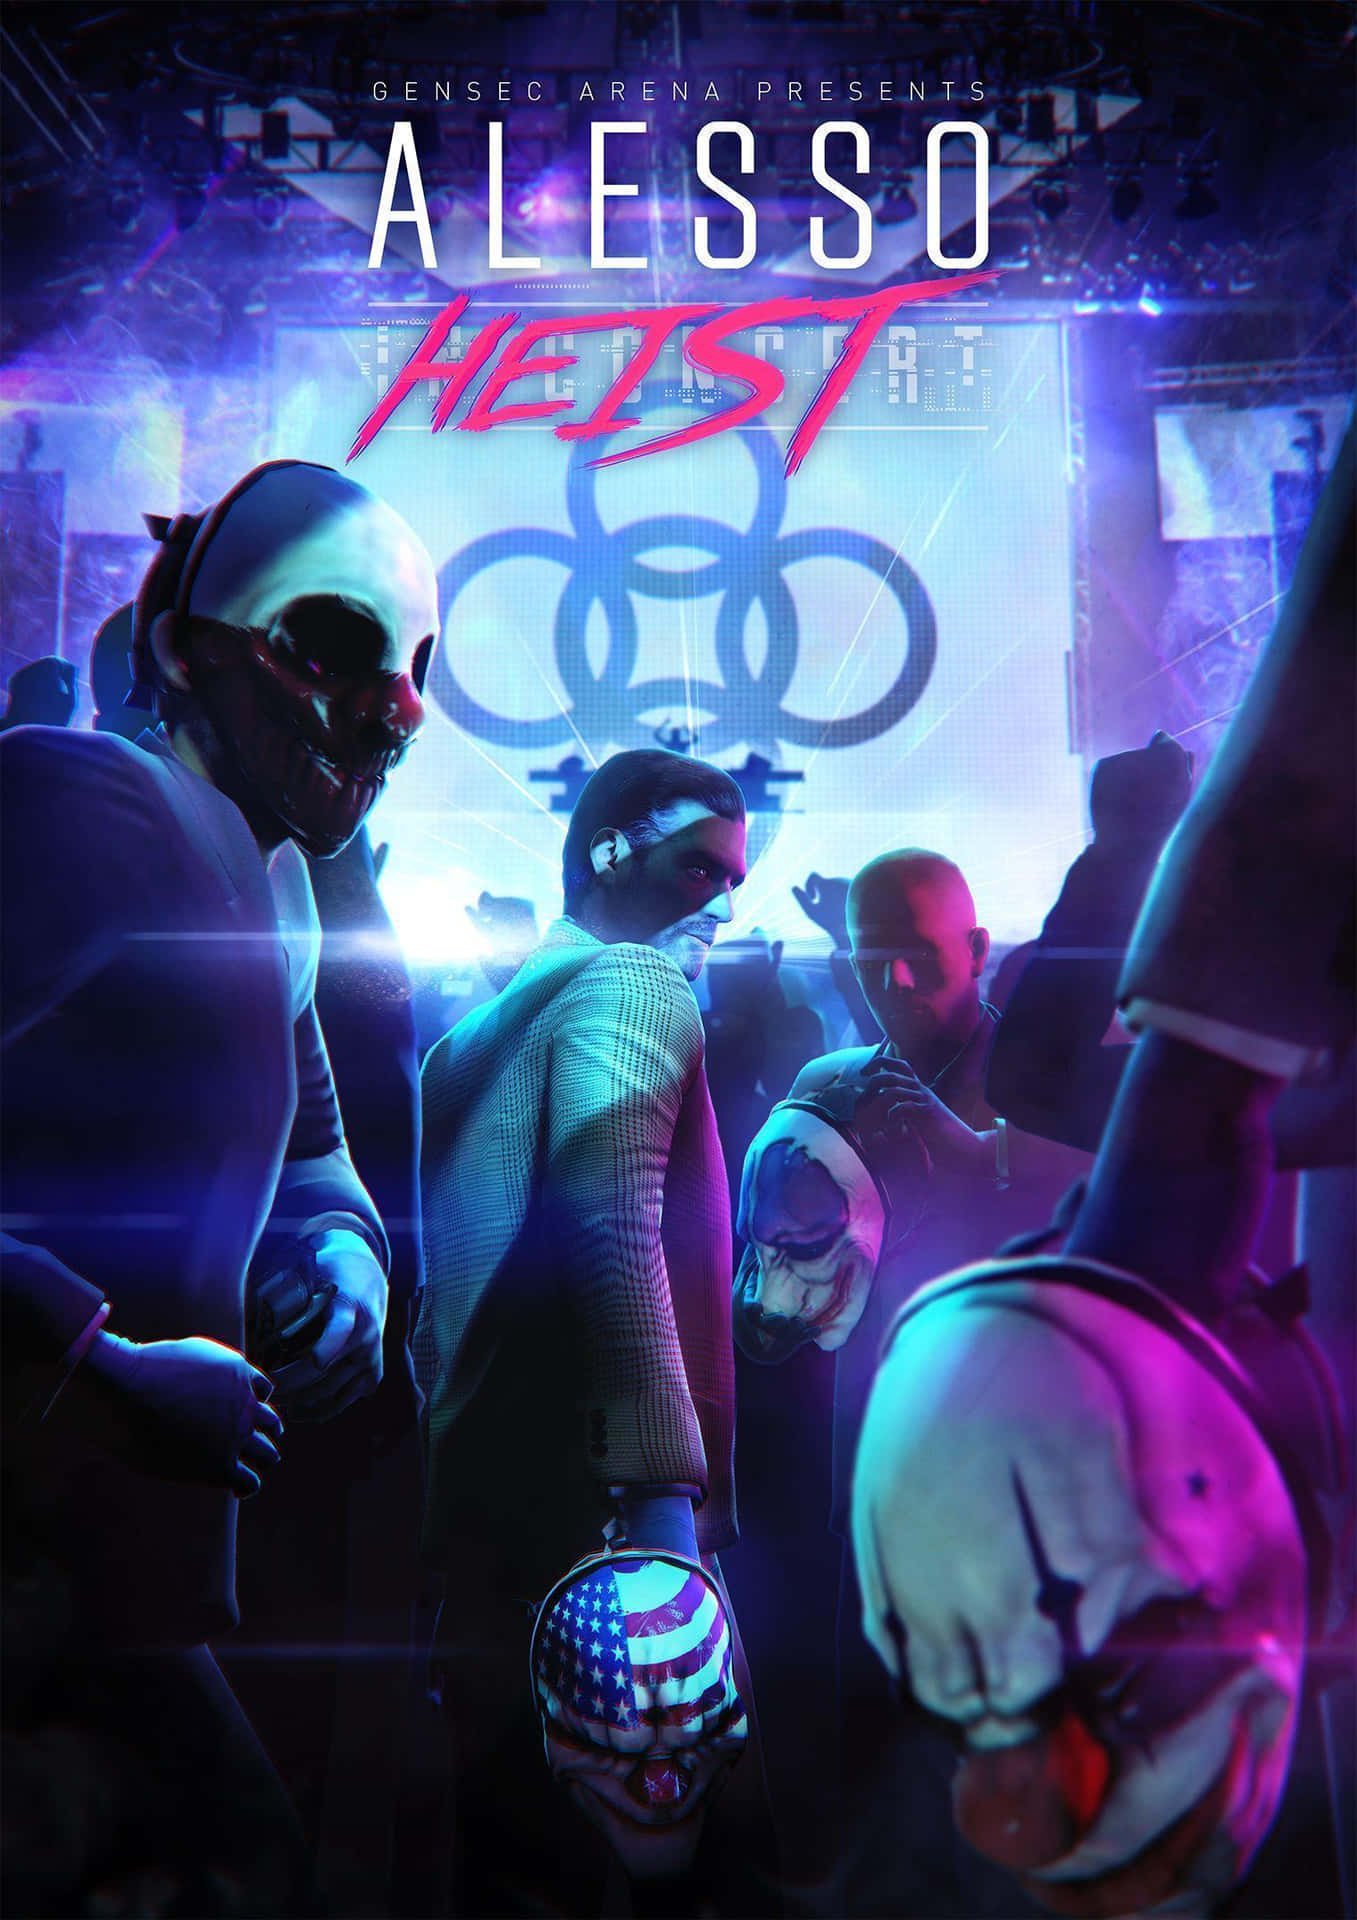 the cover of the album, alexso heist